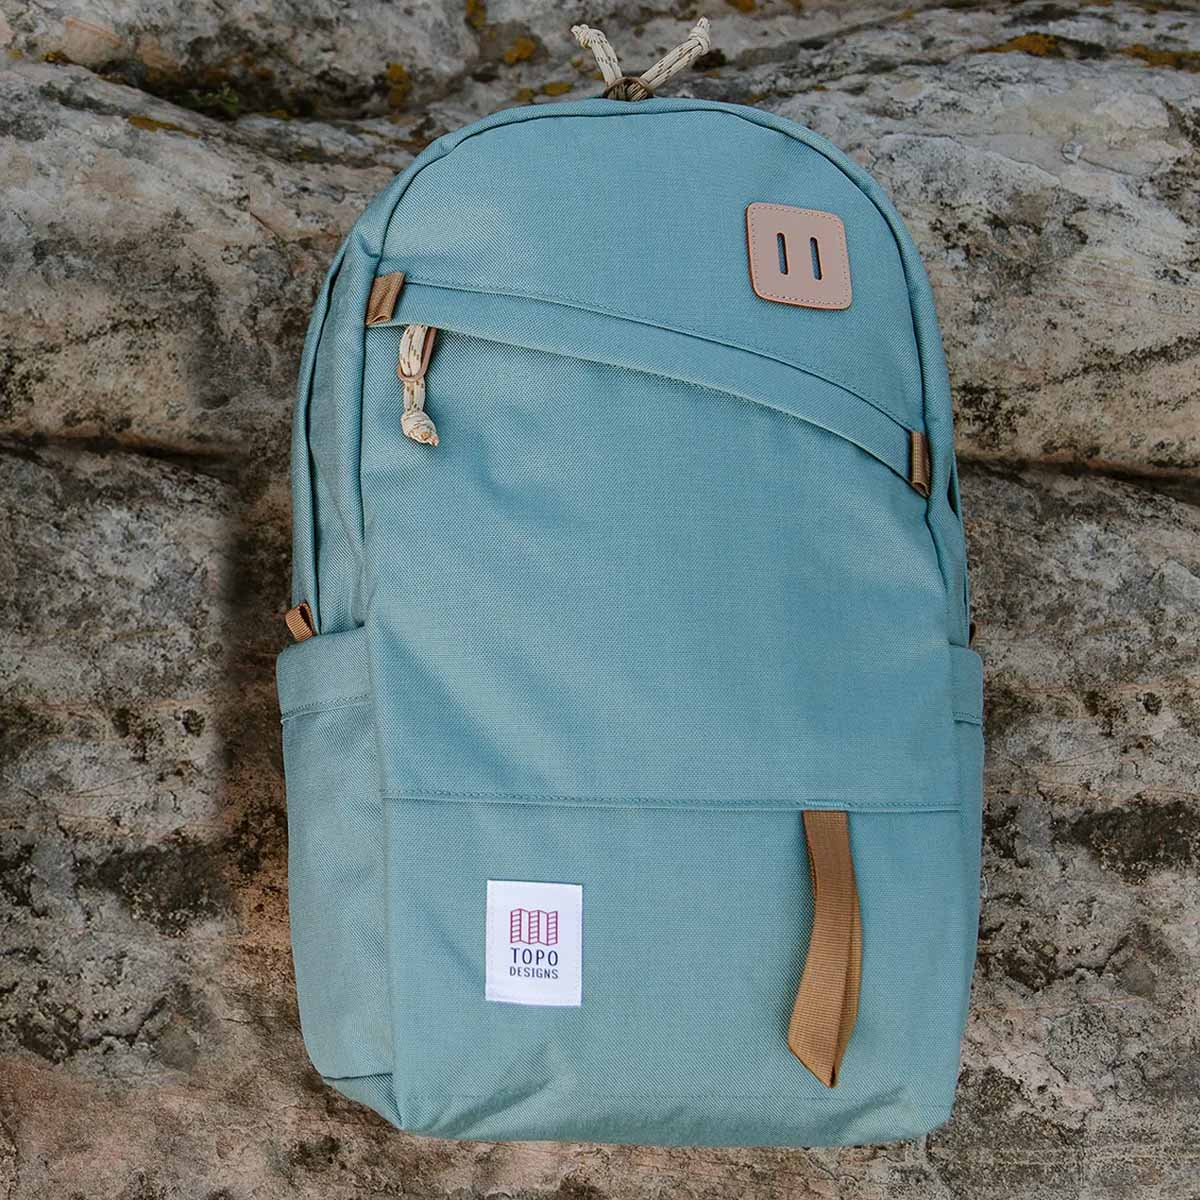 Topo Designs Daypack Classic Mineral Blue, it’s great as an everyday work bag, yet it has enough room for extra layers on the trail